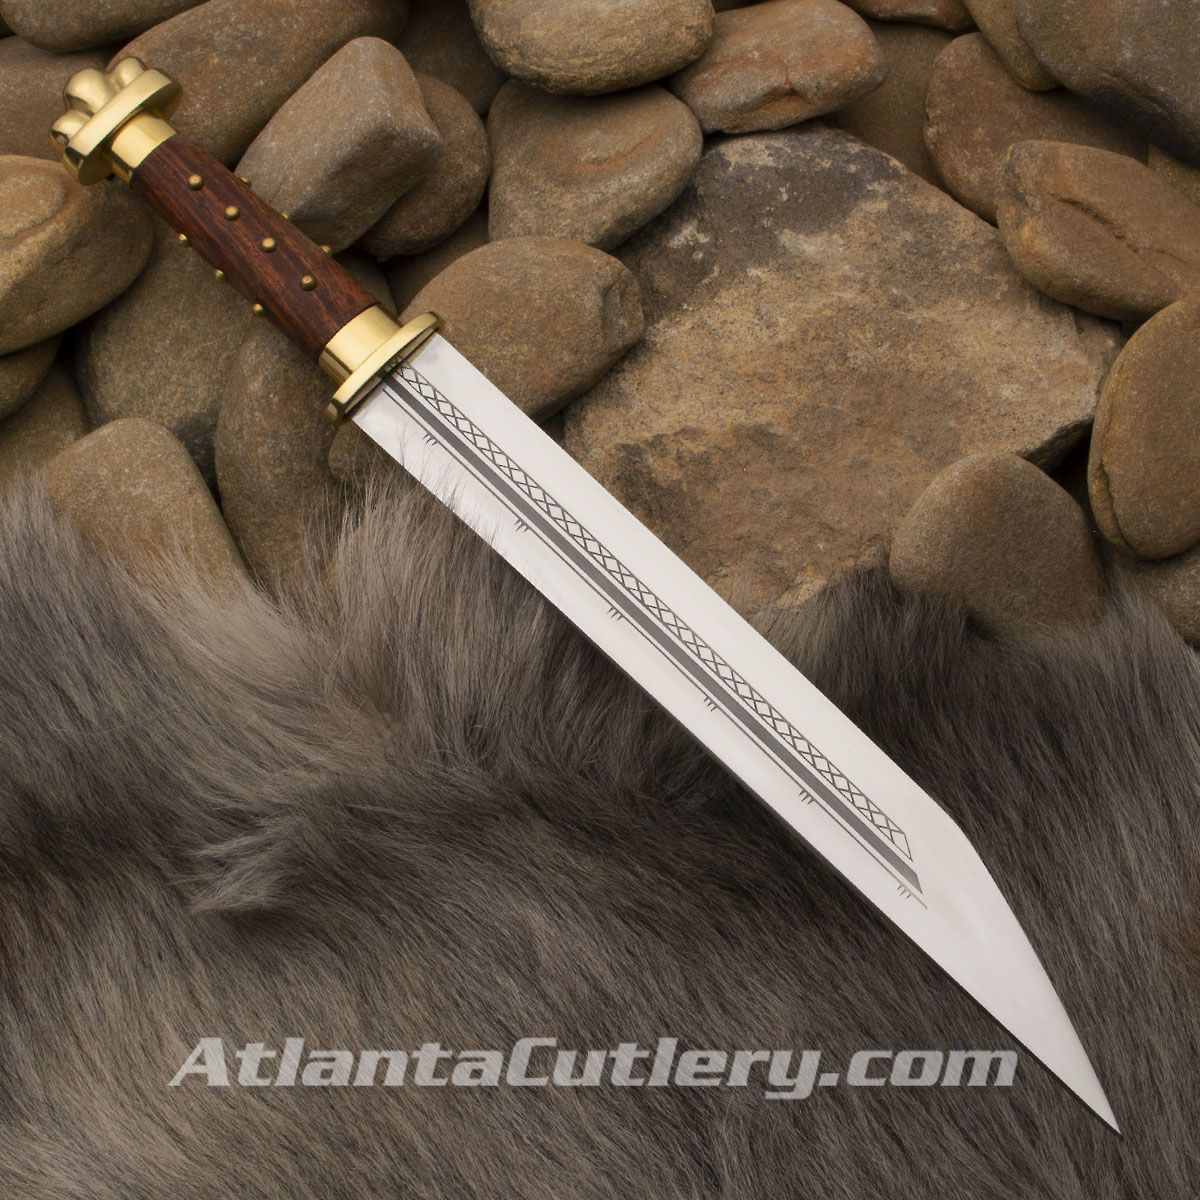 Circa 750 Replica Seax with sharp high carbon steel blade and wood grip with brass tacks, brass guard and brass pommel